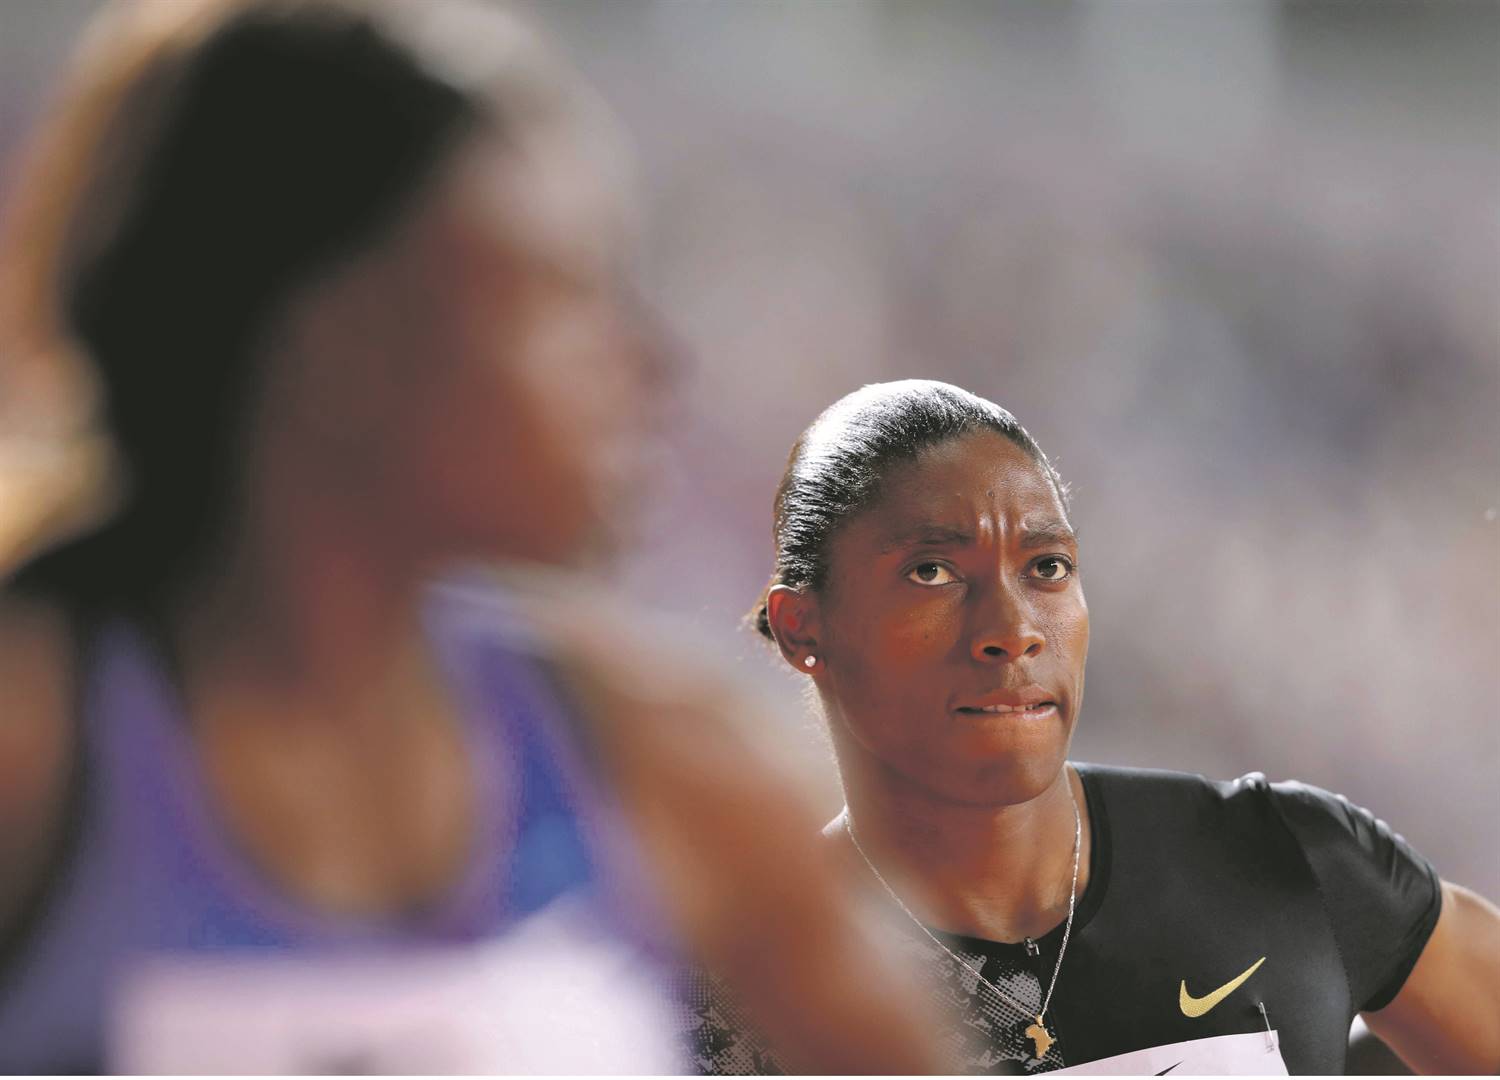 Caster Semenya can keep running without medication until the appeal is decided. Picture: Francois Nel / Getty Images